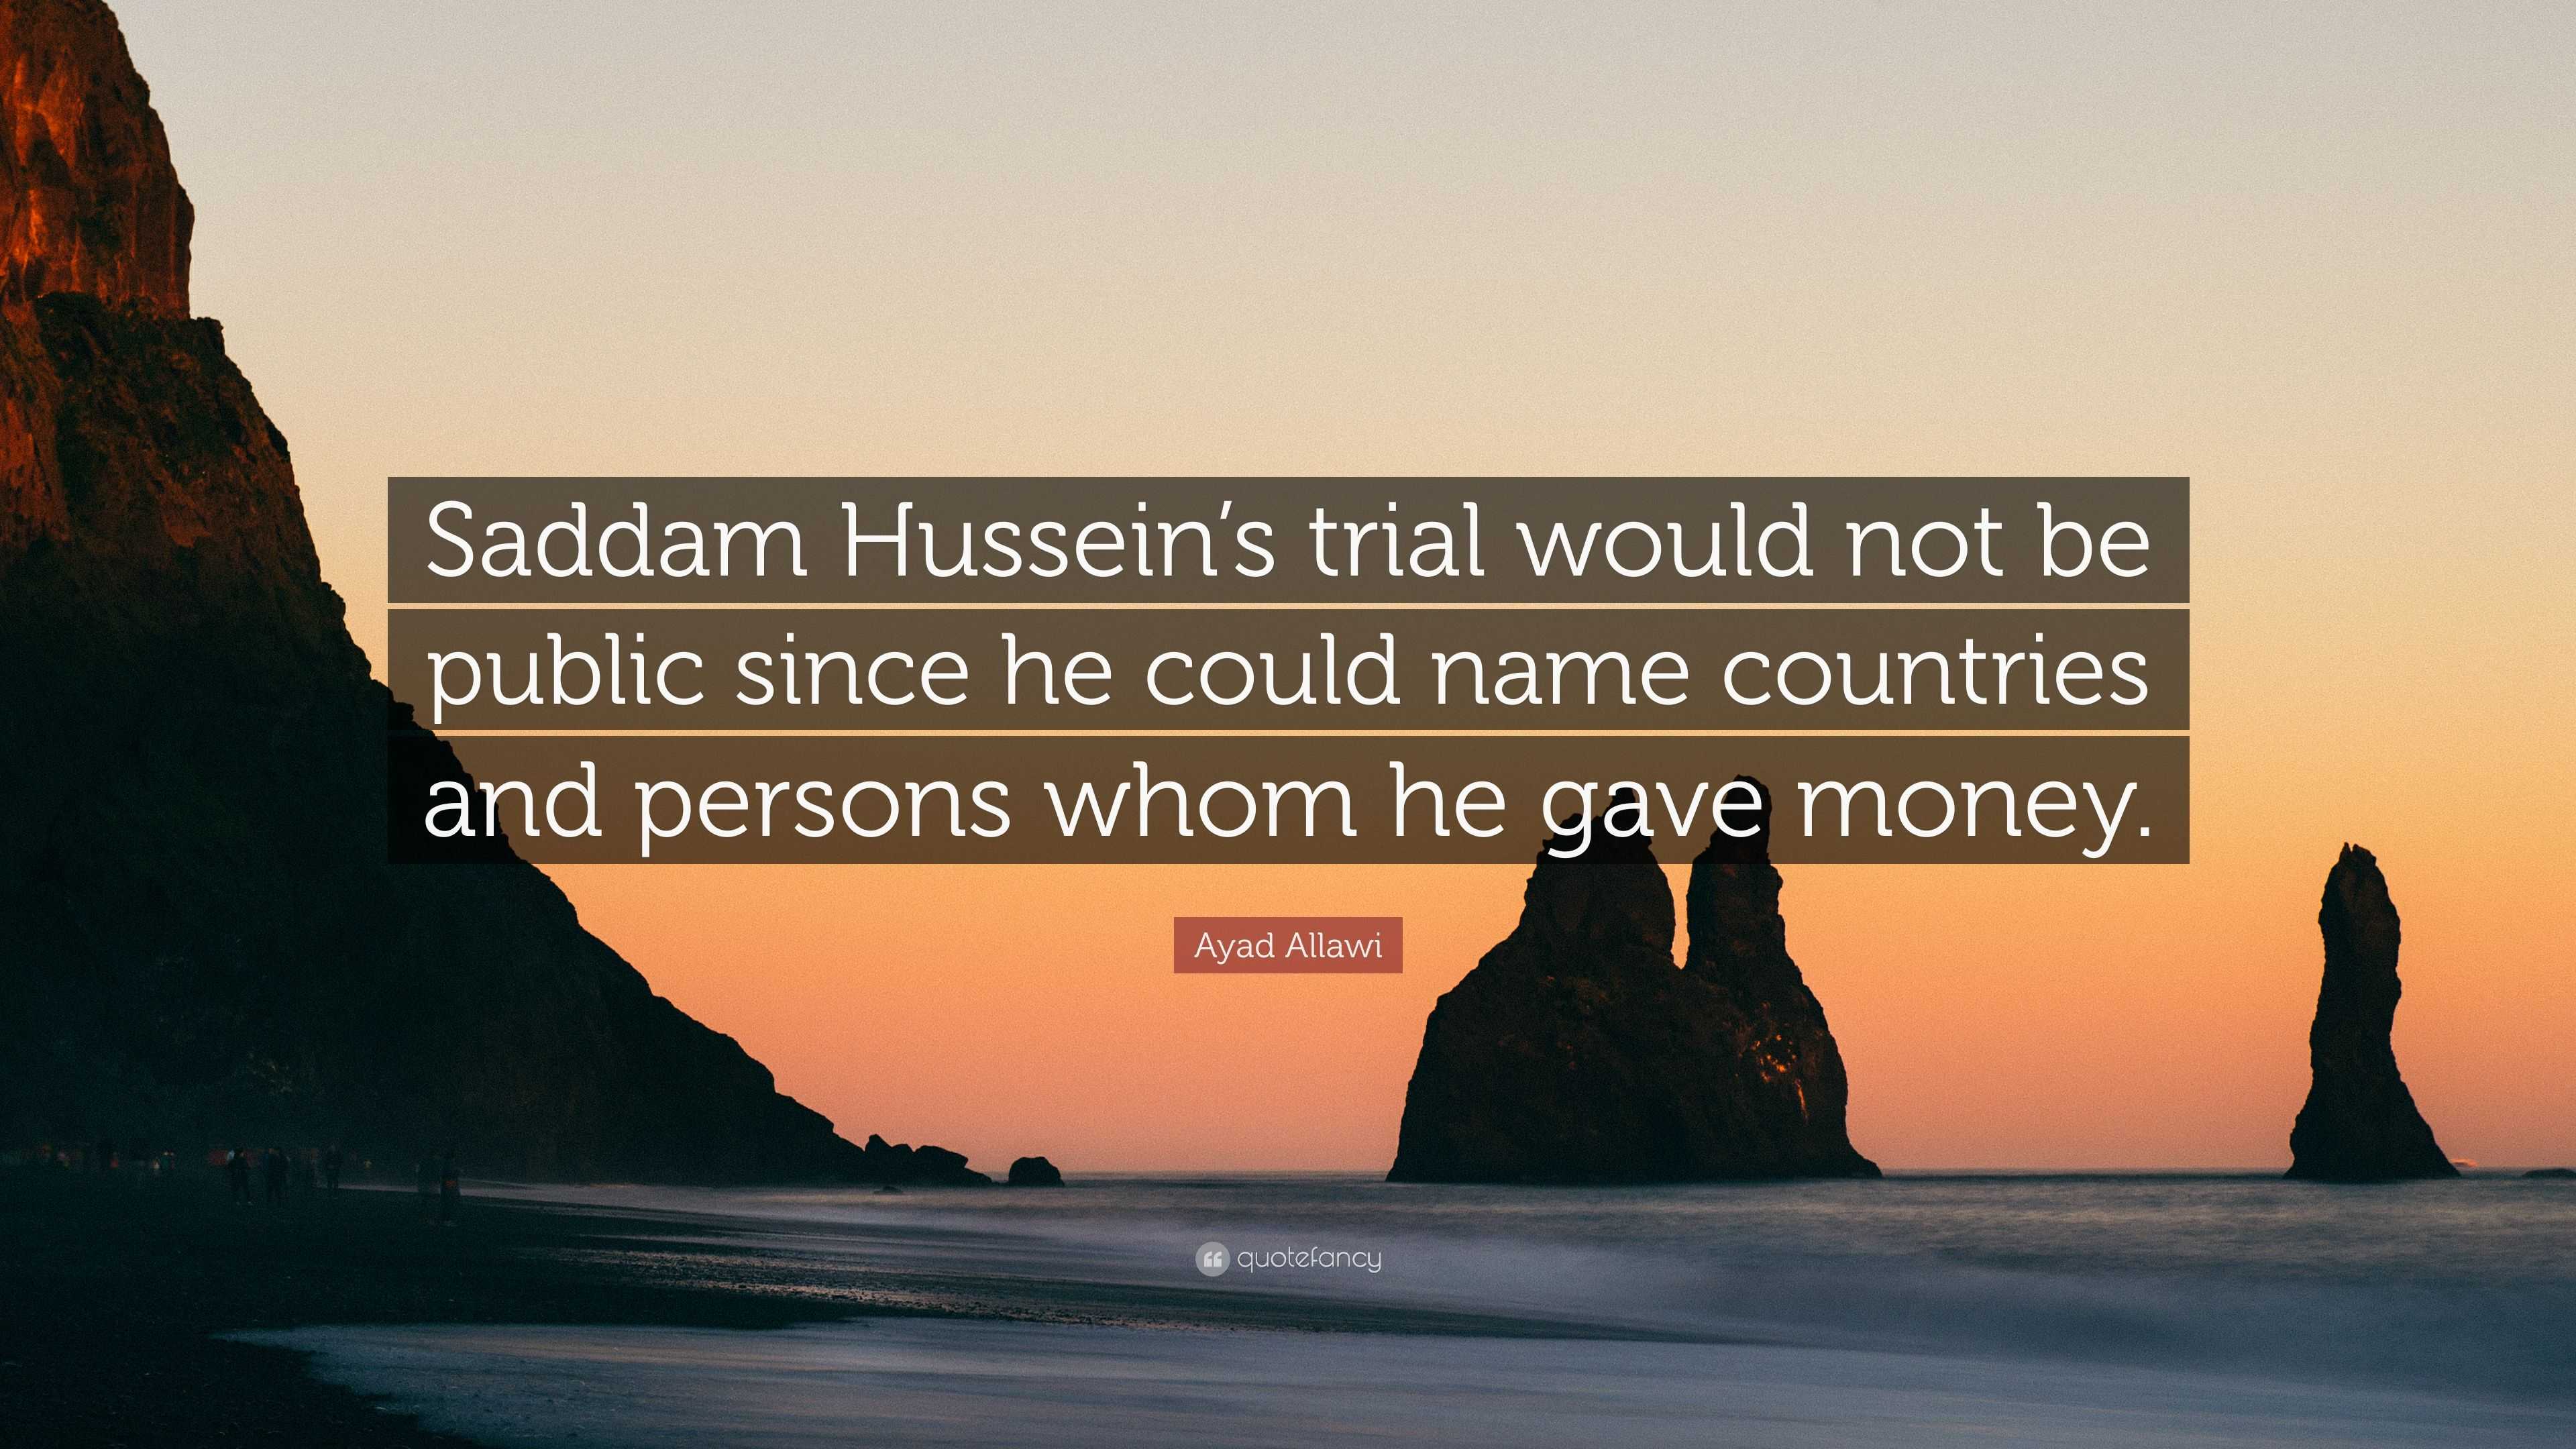 Ayad Allawi Quote: “Saddam Hussein's trial would not be public since he  could name countries and